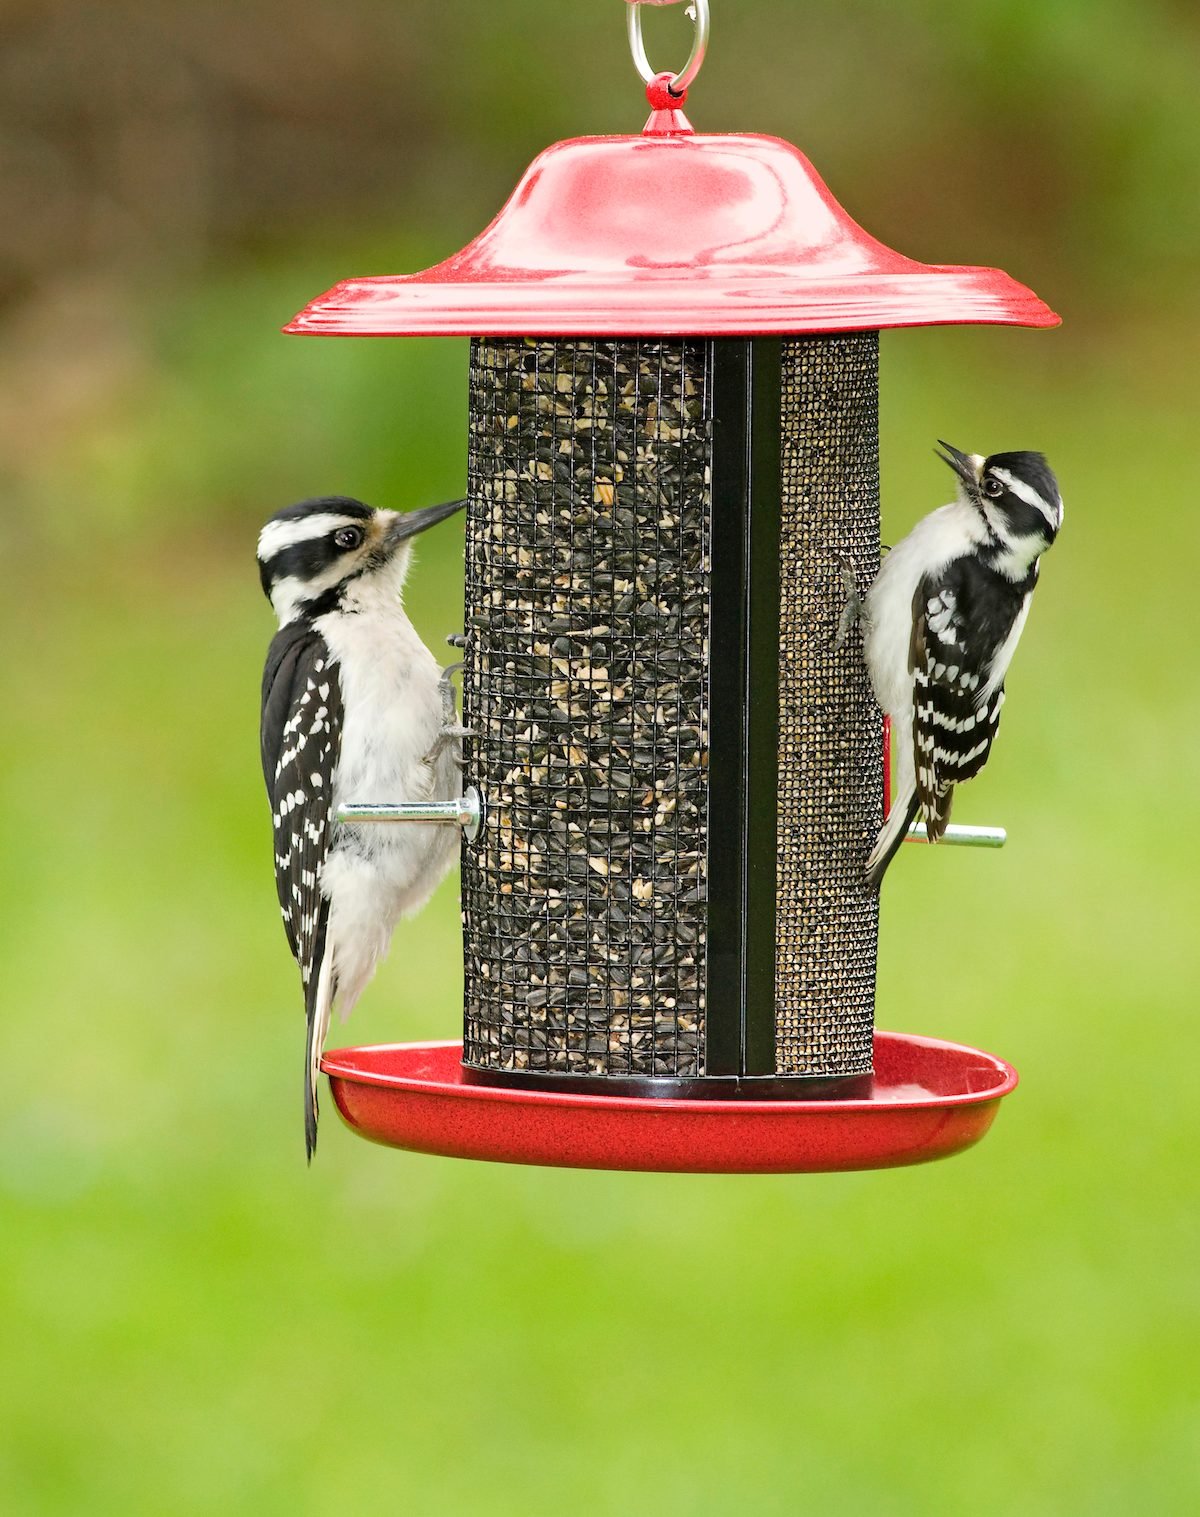 Downy vs Hairy Woodpecker: How to Tell the Difference